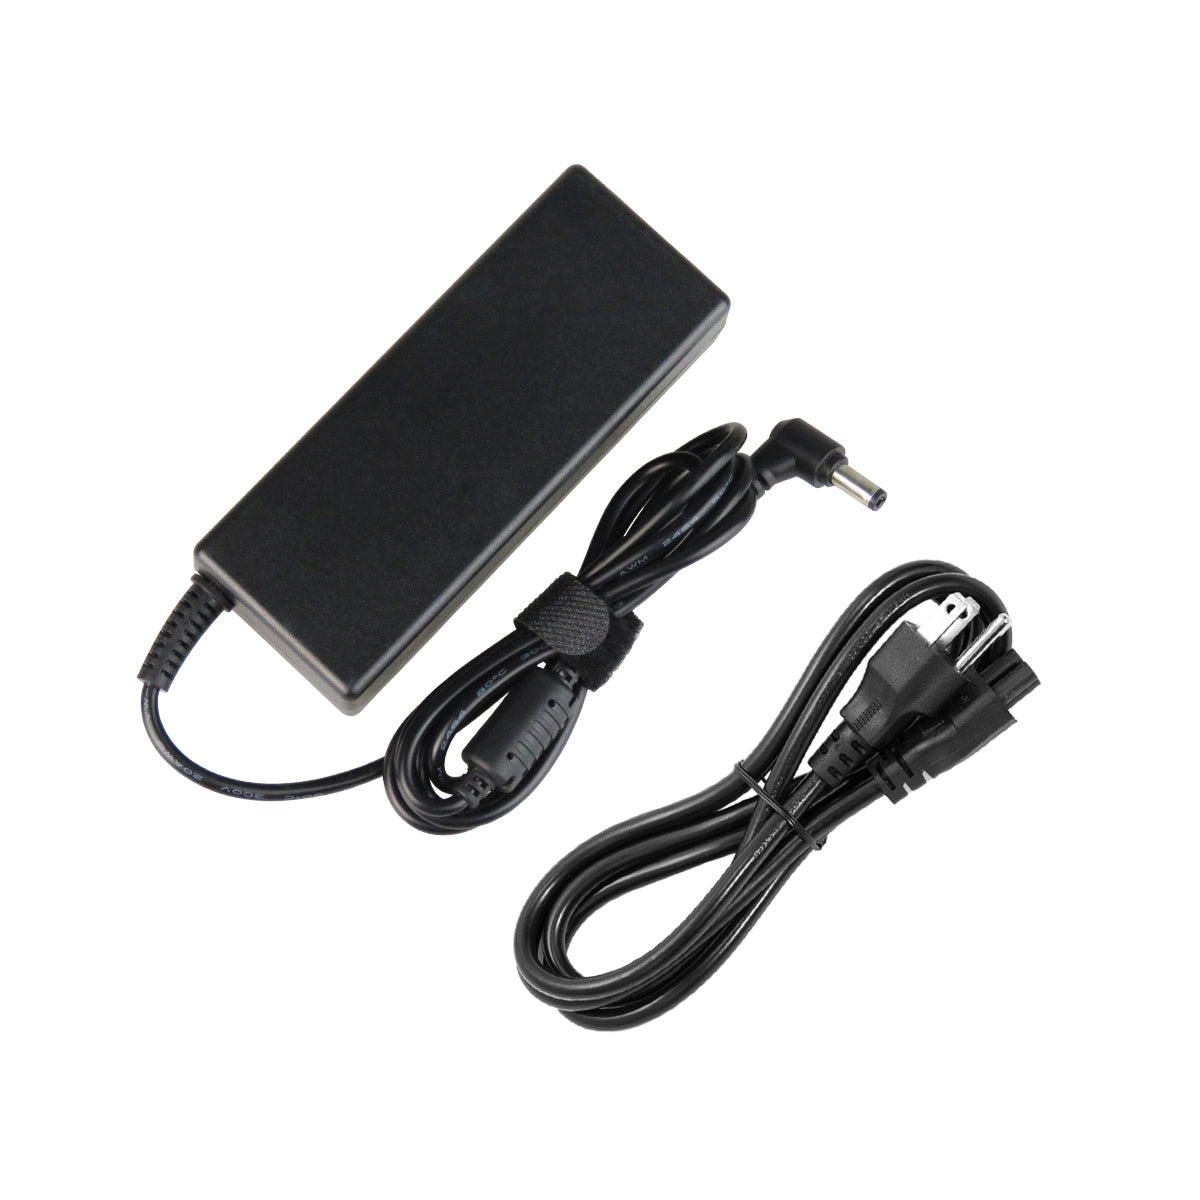 AC Adapter Charger for ASUS Q506 Notebook.